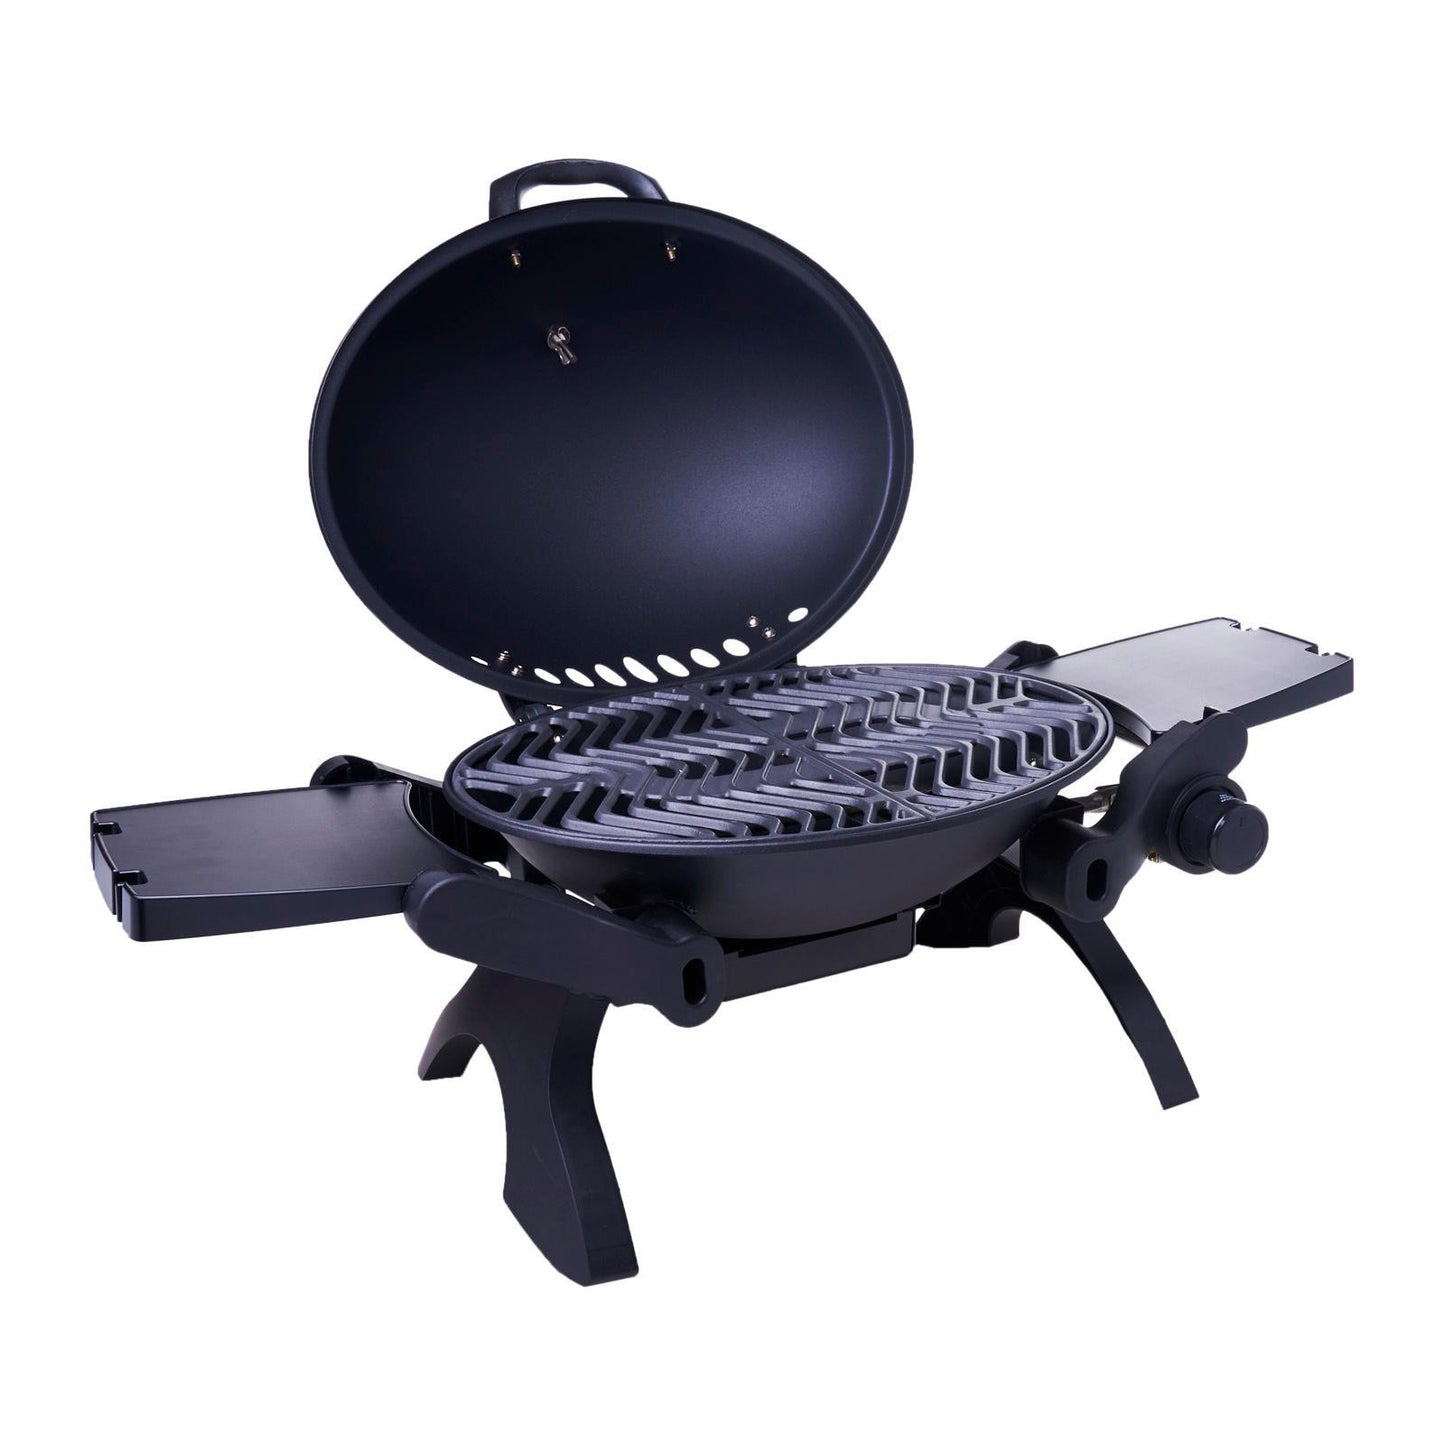 BBQ Warehouse Portable Gas Grill